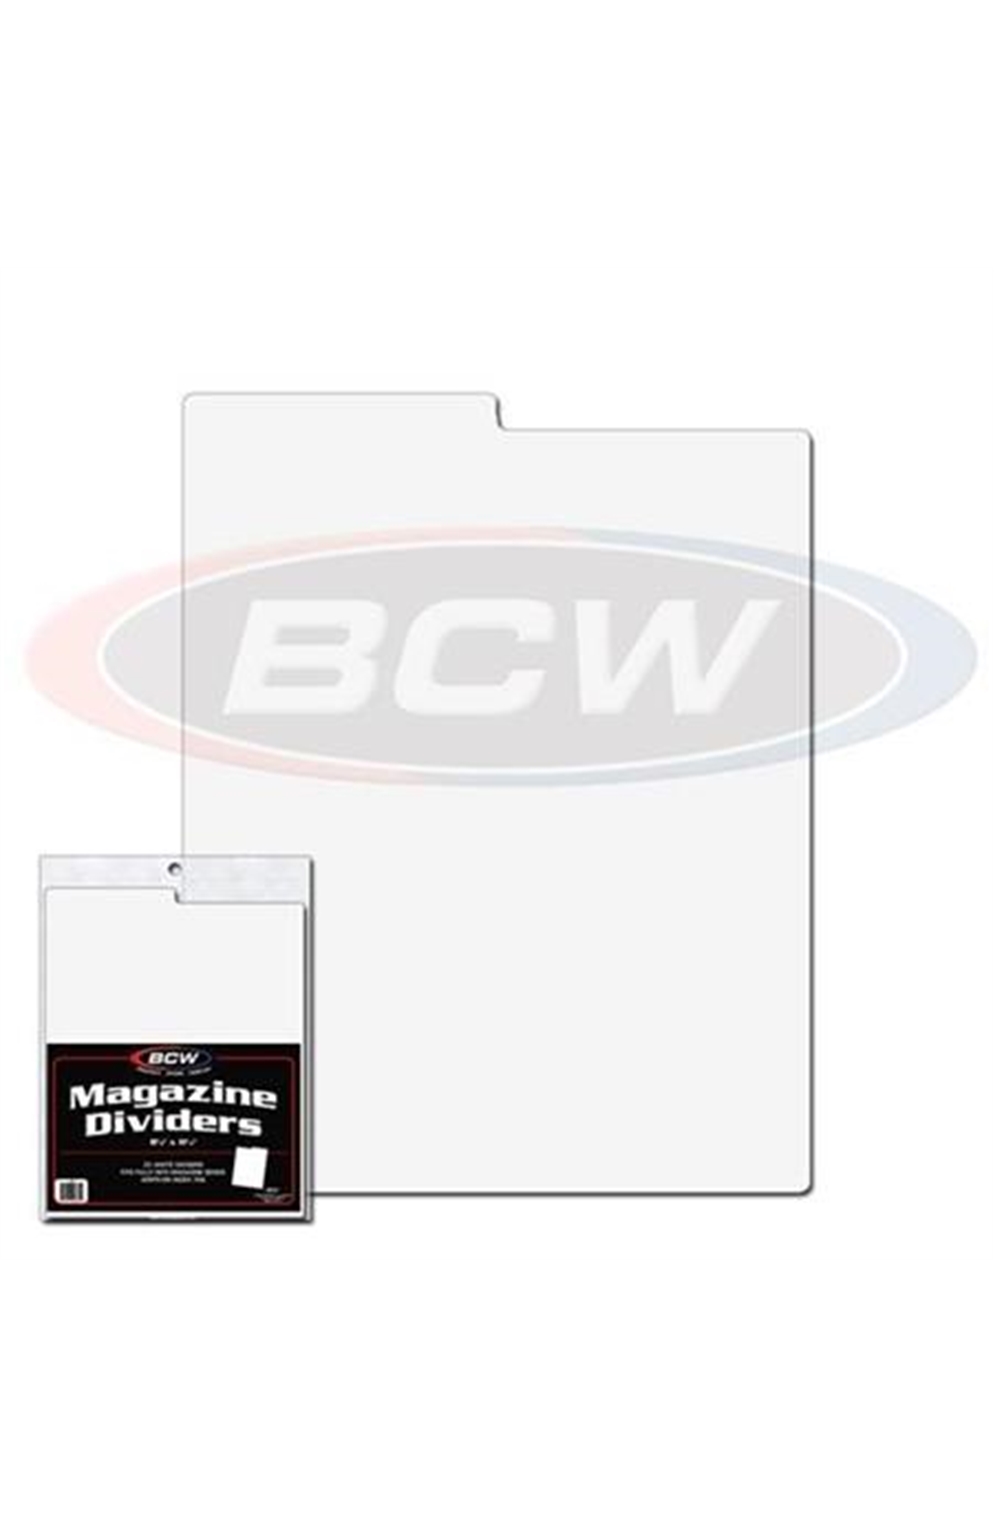 Bcw Magazine Dividers - White (Pack of 25)